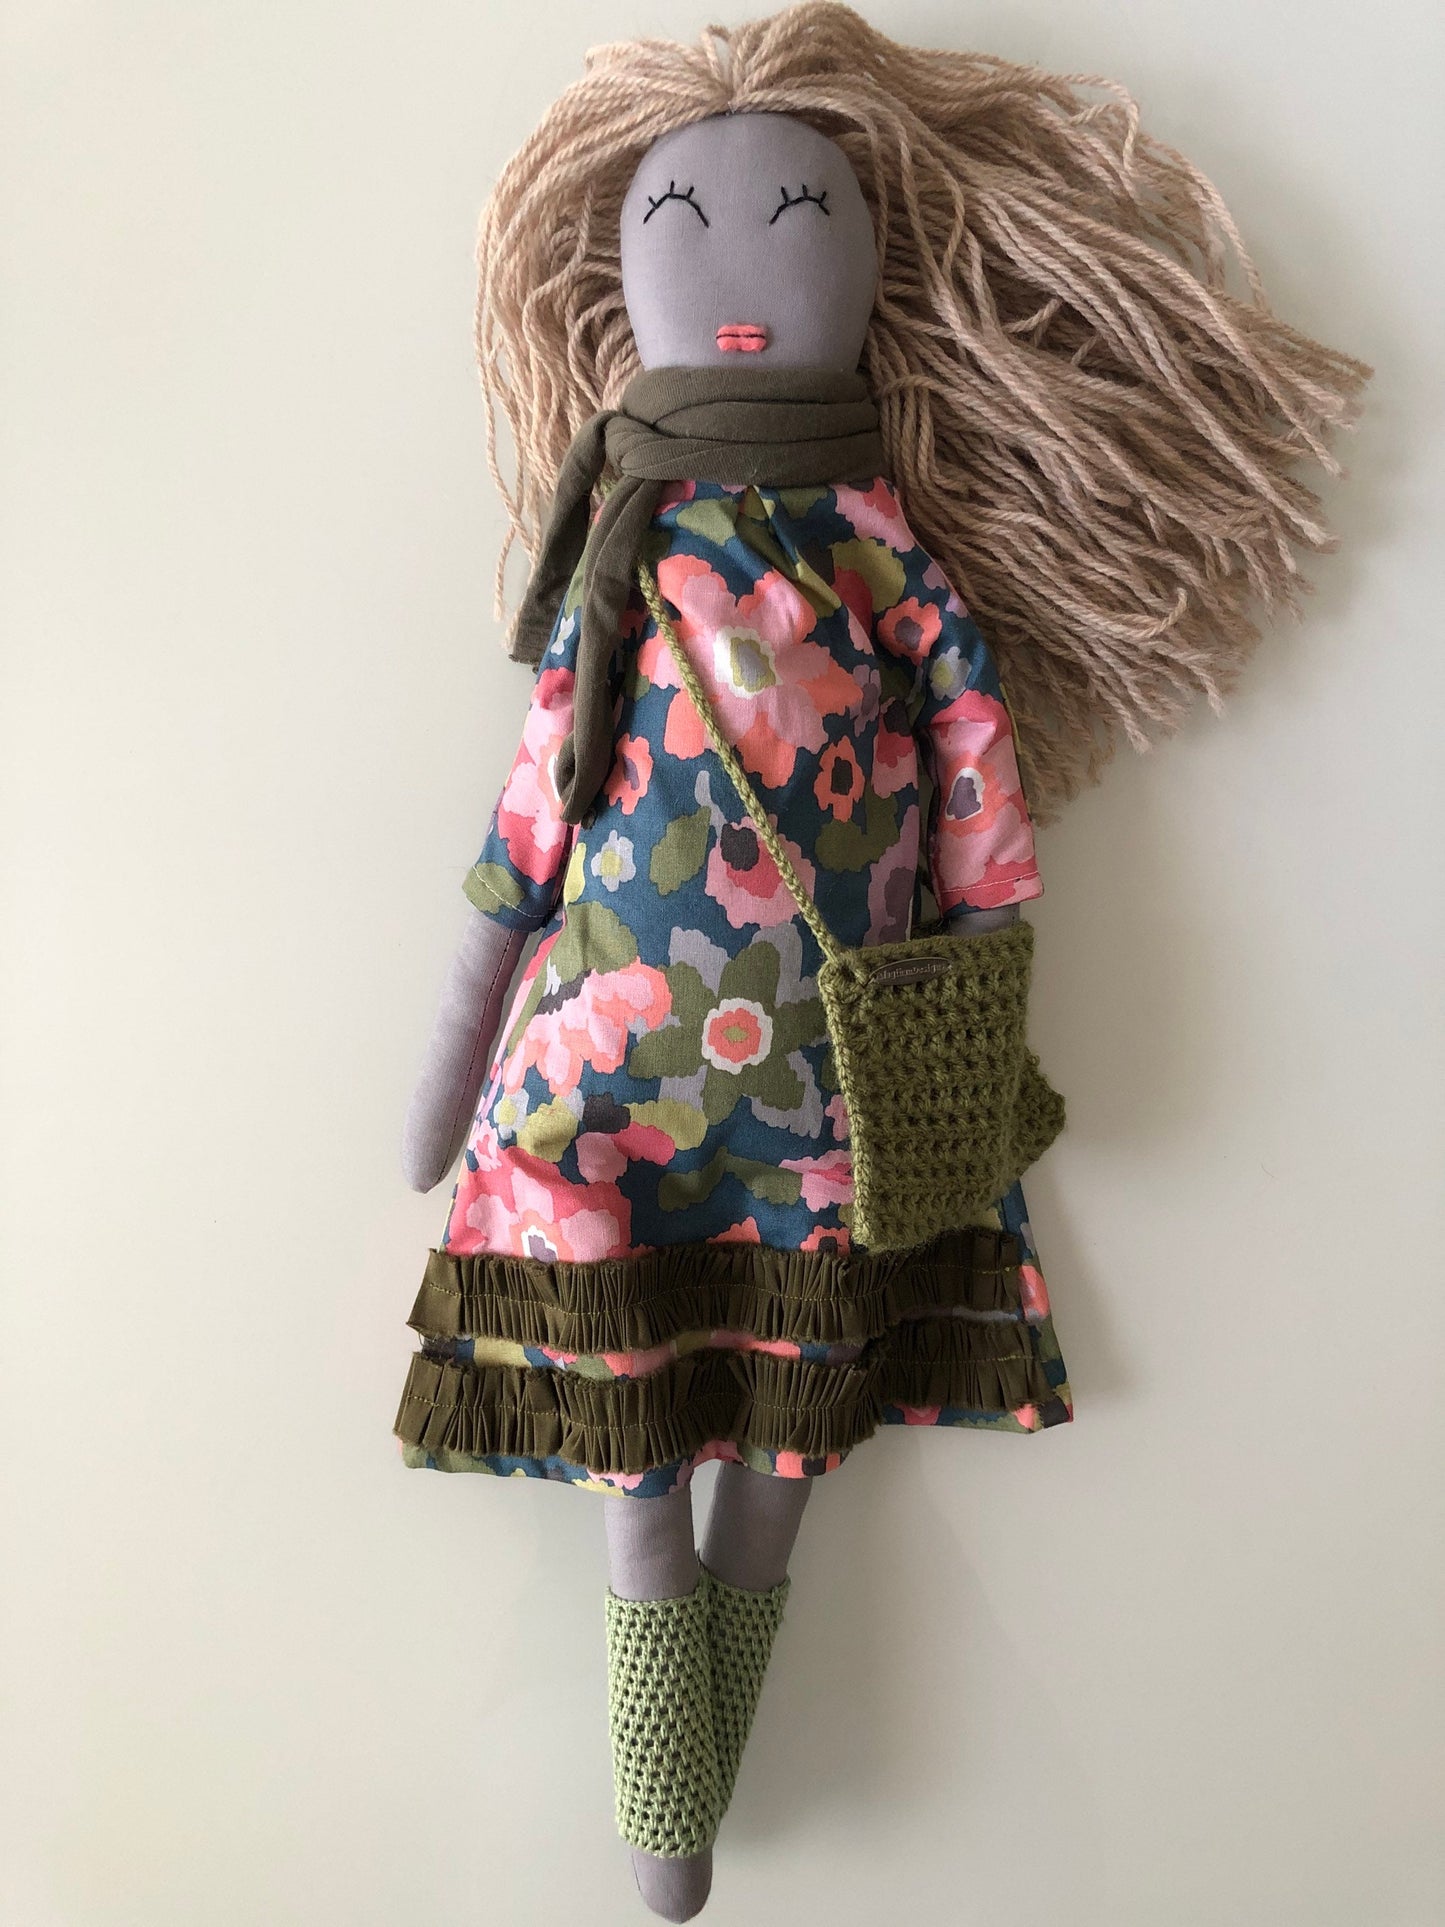 Handmade Doll 22 inches Textile Doll